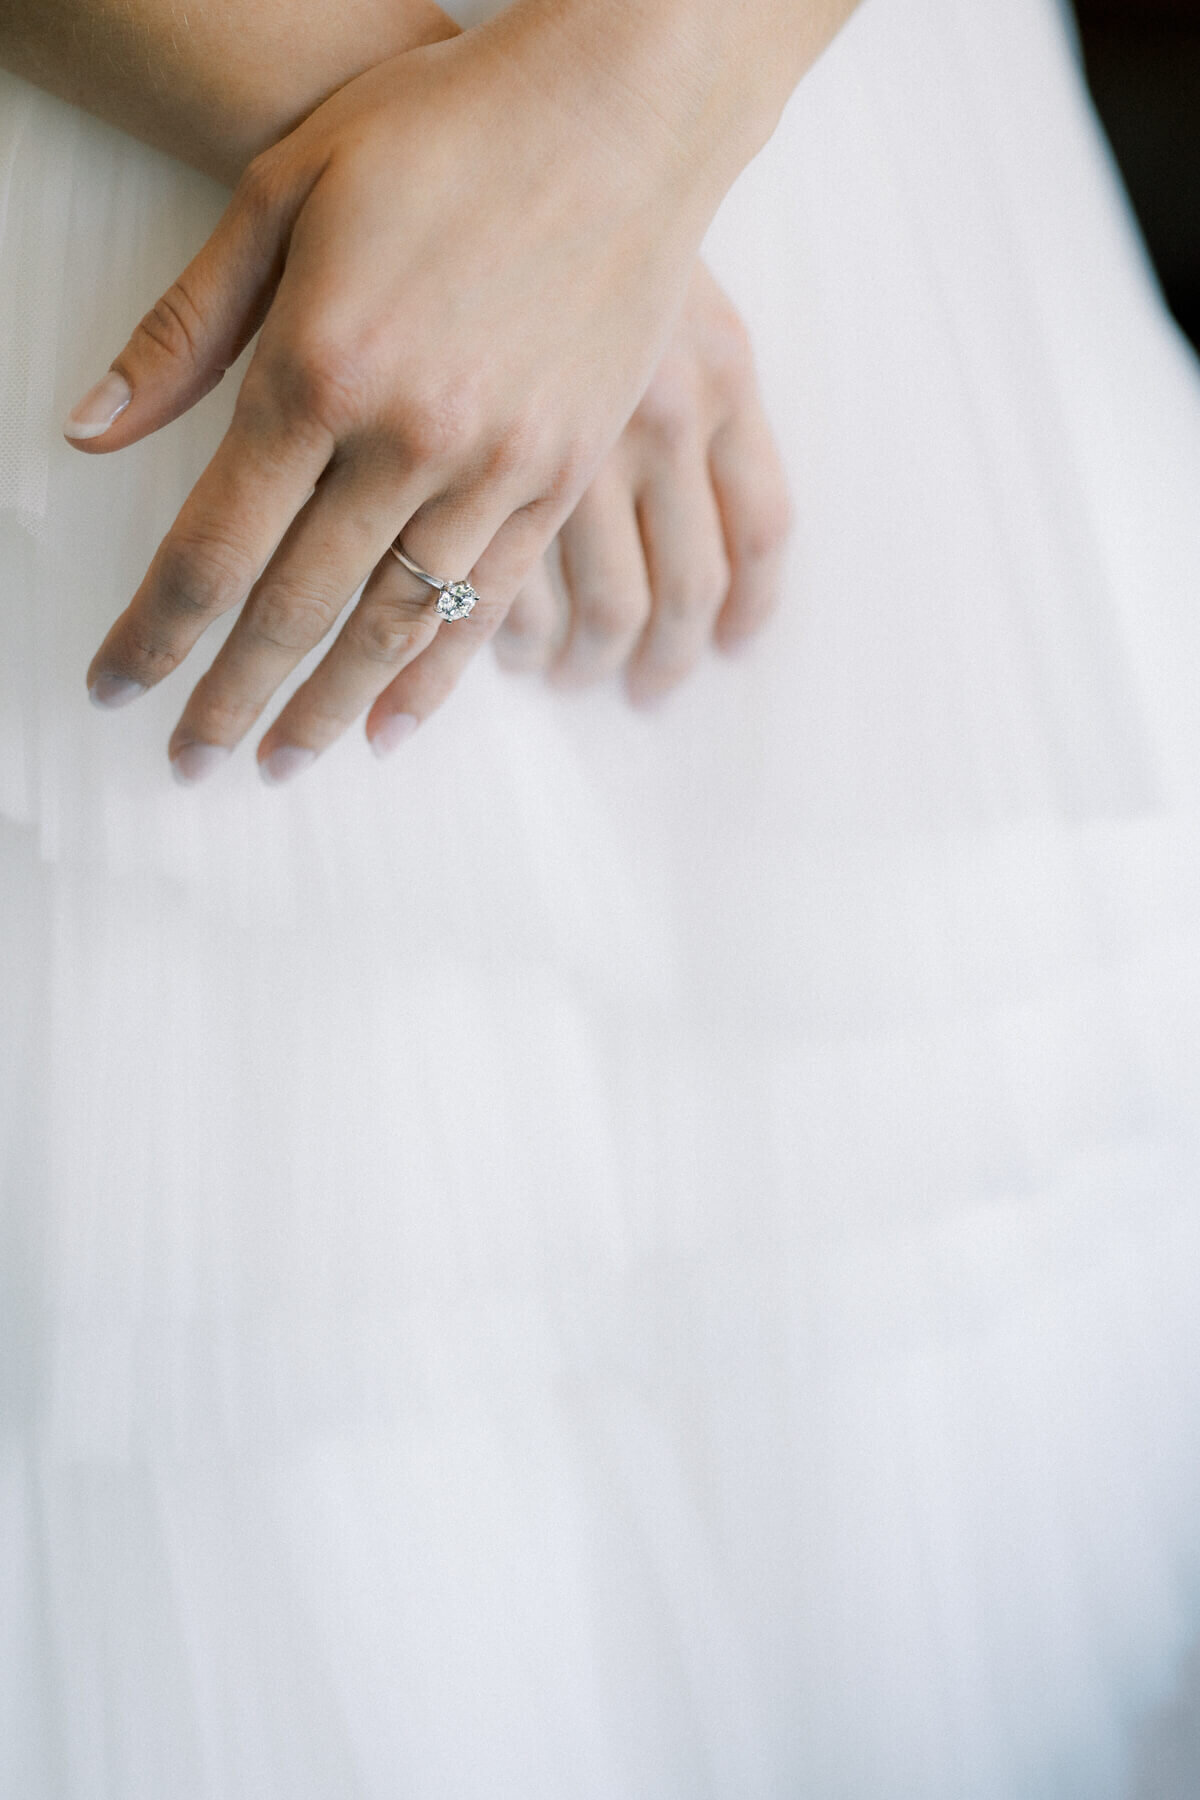 Bride's hands with her engagement ring